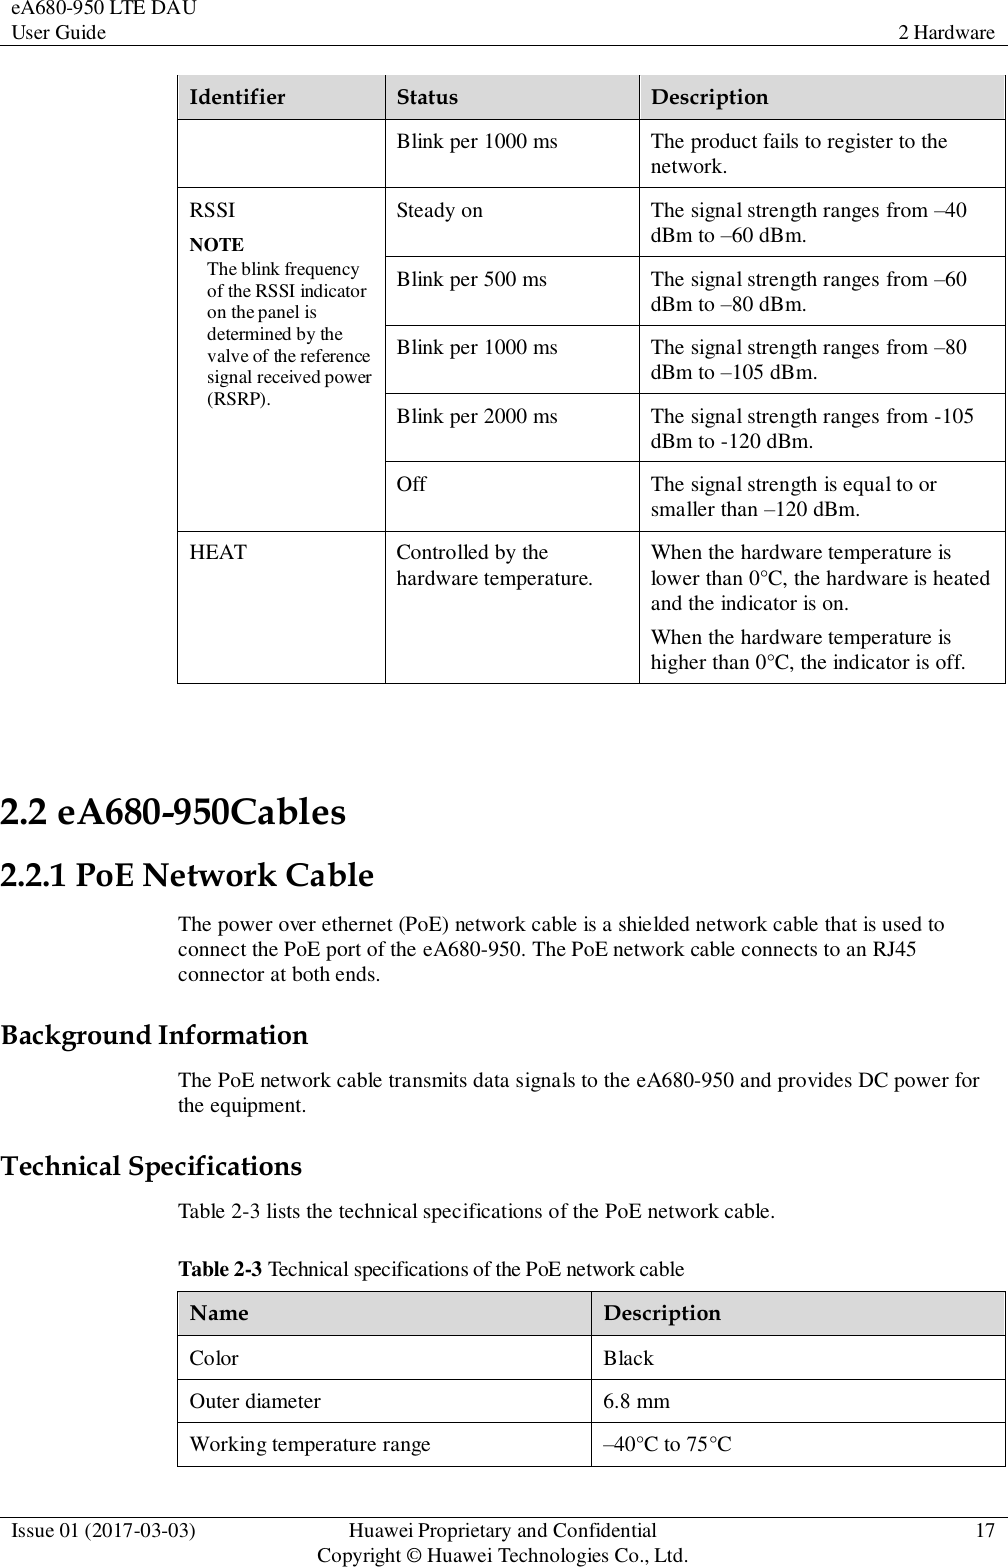 eA680-950 LTE DAU User Guide 2 Hardware  Issue 01 (2017-03-03) Huawei Proprietary and Confidential                                     Copyright © Huawei Technologies Co., Ltd. 17  Identifier Status Description Blink per 1000 ms The product fails to register to the network. RSSI NOTE The blink frequency of the RSSI indicator on the panel is determined by the valve of the reference signal received power (RSRP). Steady on The signal strength ranges from –40 dBm to –60 dBm. Blink per 500 ms The signal strength ranges from –60 dBm to –80 dBm. Blink per 1000 ms The signal strength ranges from –80 dBm to –105 dBm. Blink per 2000 ms The signal strength ranges from -105 dBm to -120 dBm. Off The signal strength is equal to or smaller than –120 dBm.   HEAT Controlled by the hardware temperature. When the hardware temperature is lower than 0°C, the hardware is heated and the indicator is on.   When the hardware temperature is higher than 0°C, the indicator is off.  2.2 eA680-950Cables 2.2.1 PoE Network Cable The power over ethernet (PoE) network cable is a shielded network cable that is used to connect the PoE port of the eA680-950. The PoE network cable connects to an RJ45 connector at both ends. Background Information The PoE network cable transmits data signals to the eA680-950 and provides DC power for the equipment. Technical Specifications Table 2-3 lists the technical specifications of the PoE network cable. Table 2-3 Technical specifications of the PoE network cable Name Description Color Black Outer diameter 6.8 mm Working temperature range –40°C to 75°C 